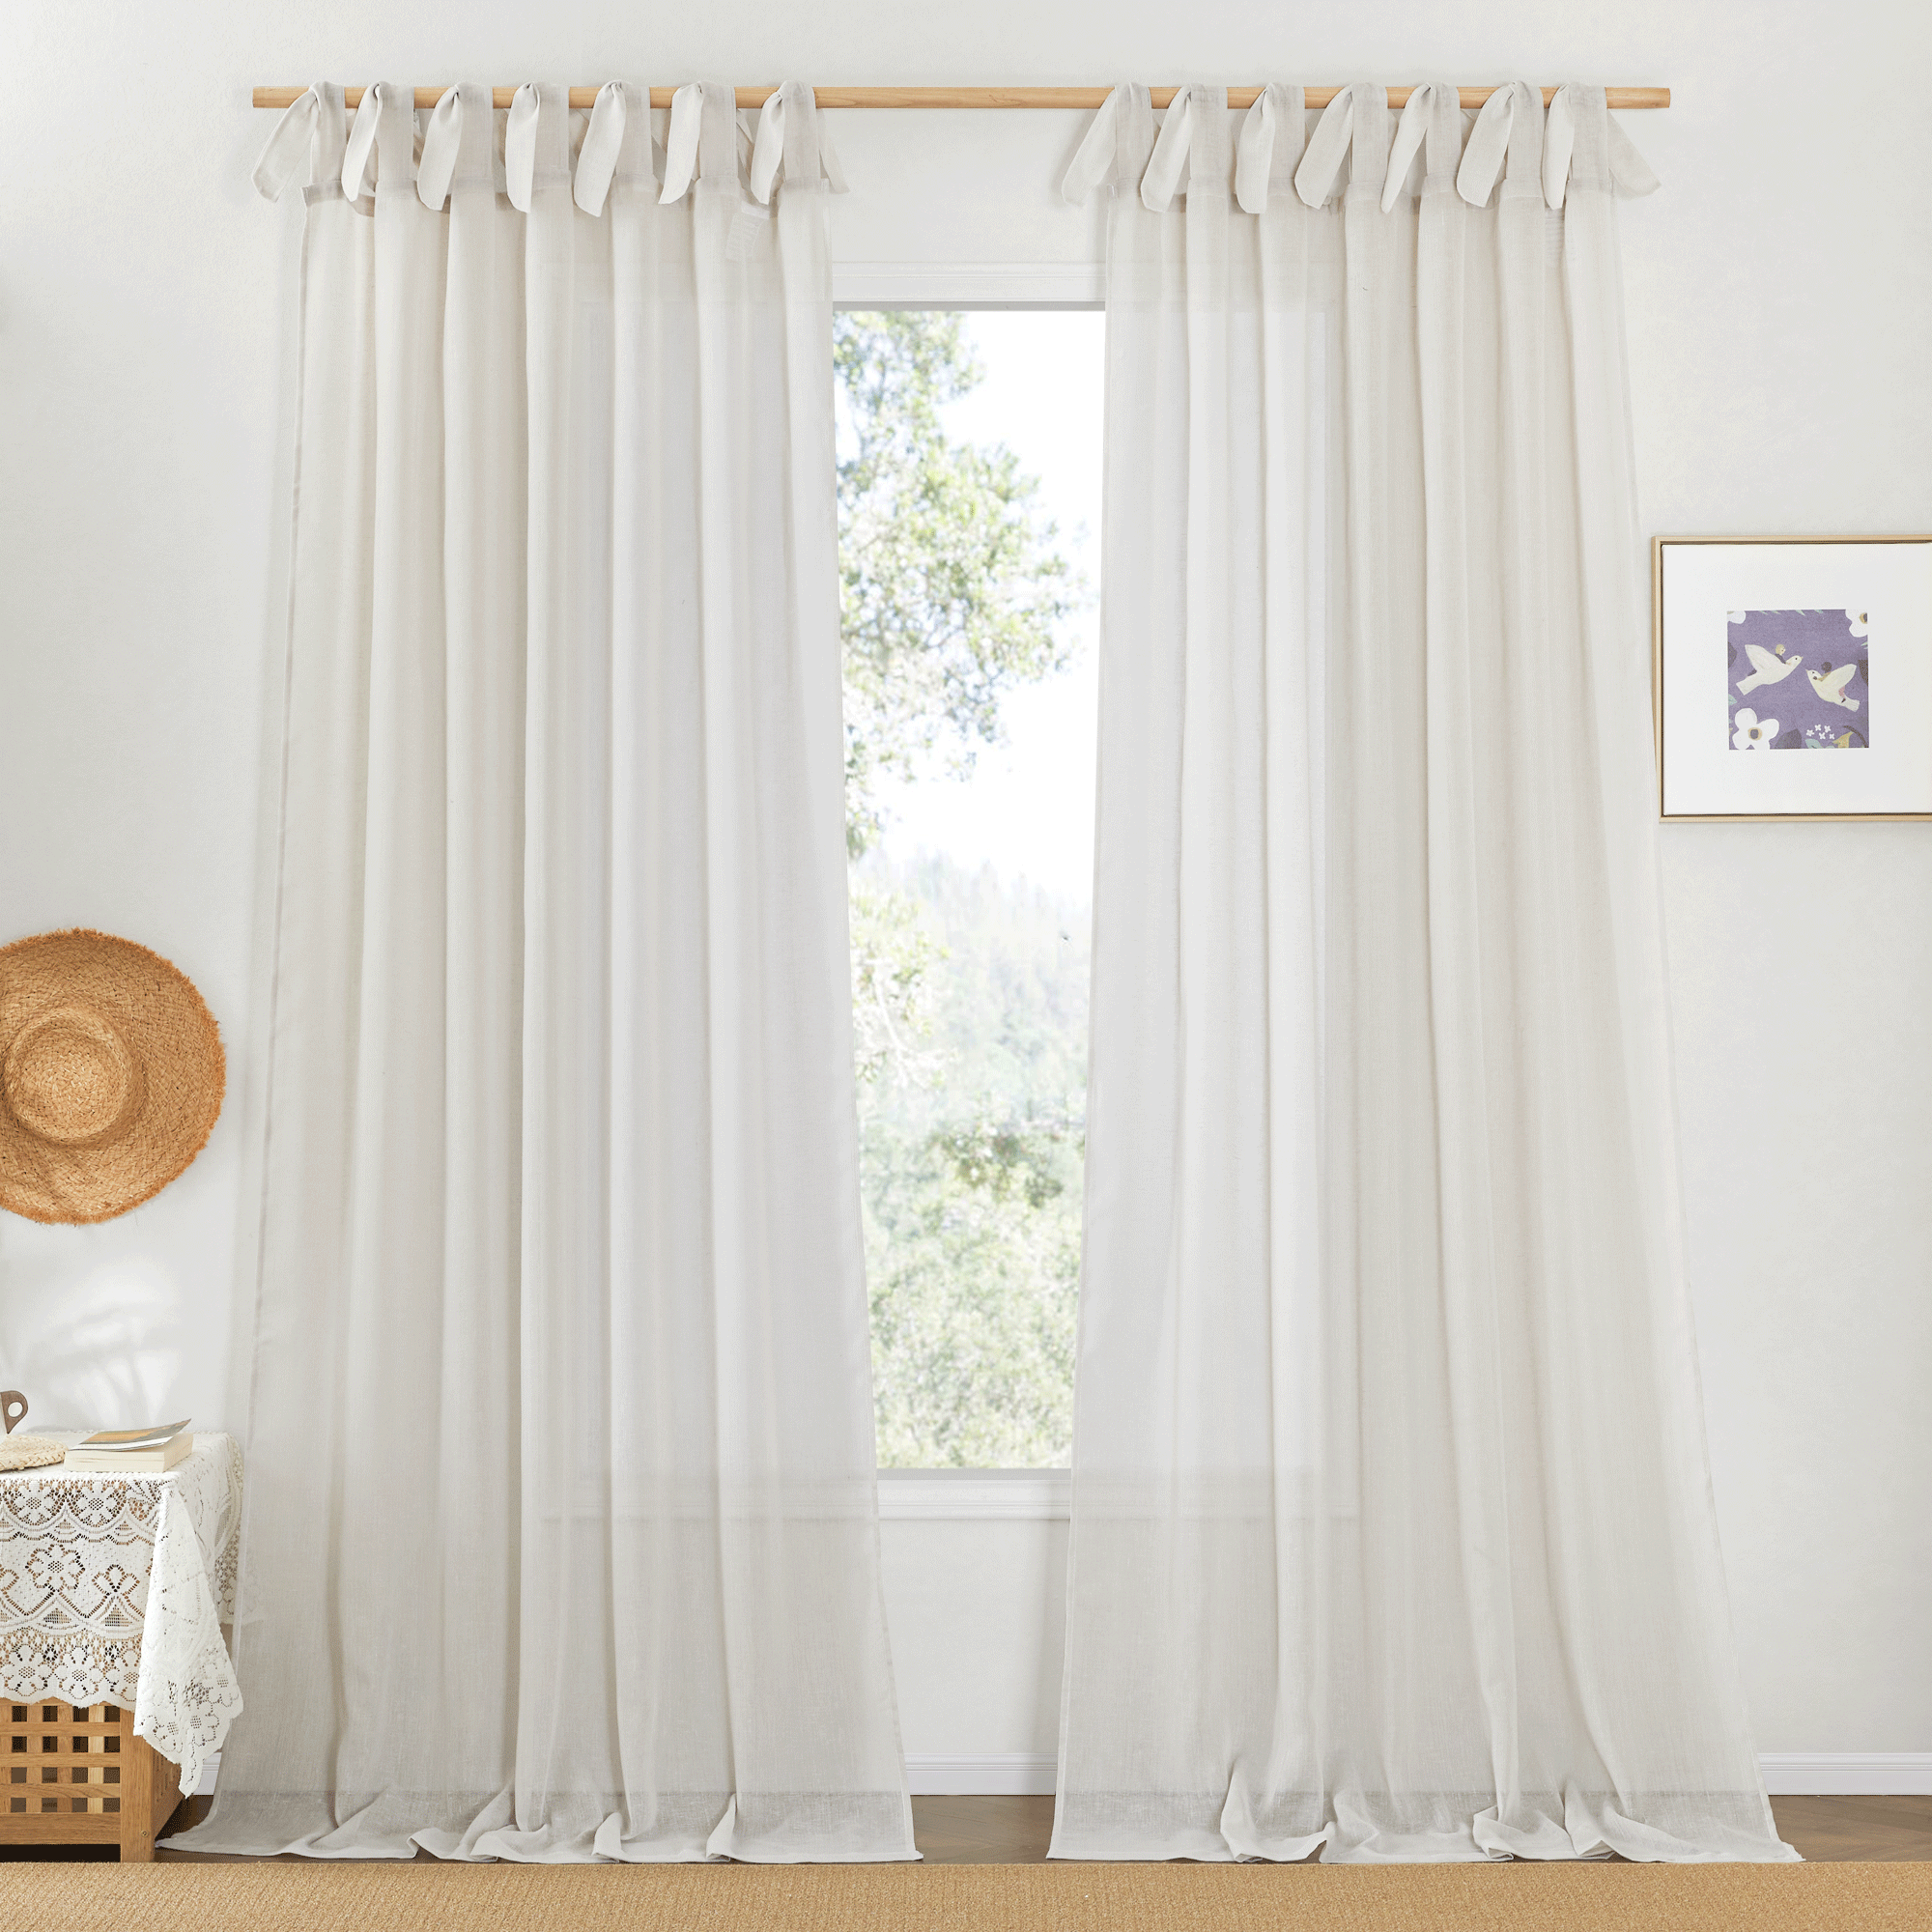 Adjustable Tie Top DIY Crafted Semi Sheer Natural Linen Blend Eclectic Privacy Rabbit Ear Curtains for Bedroom / Living Room KGORGE Store